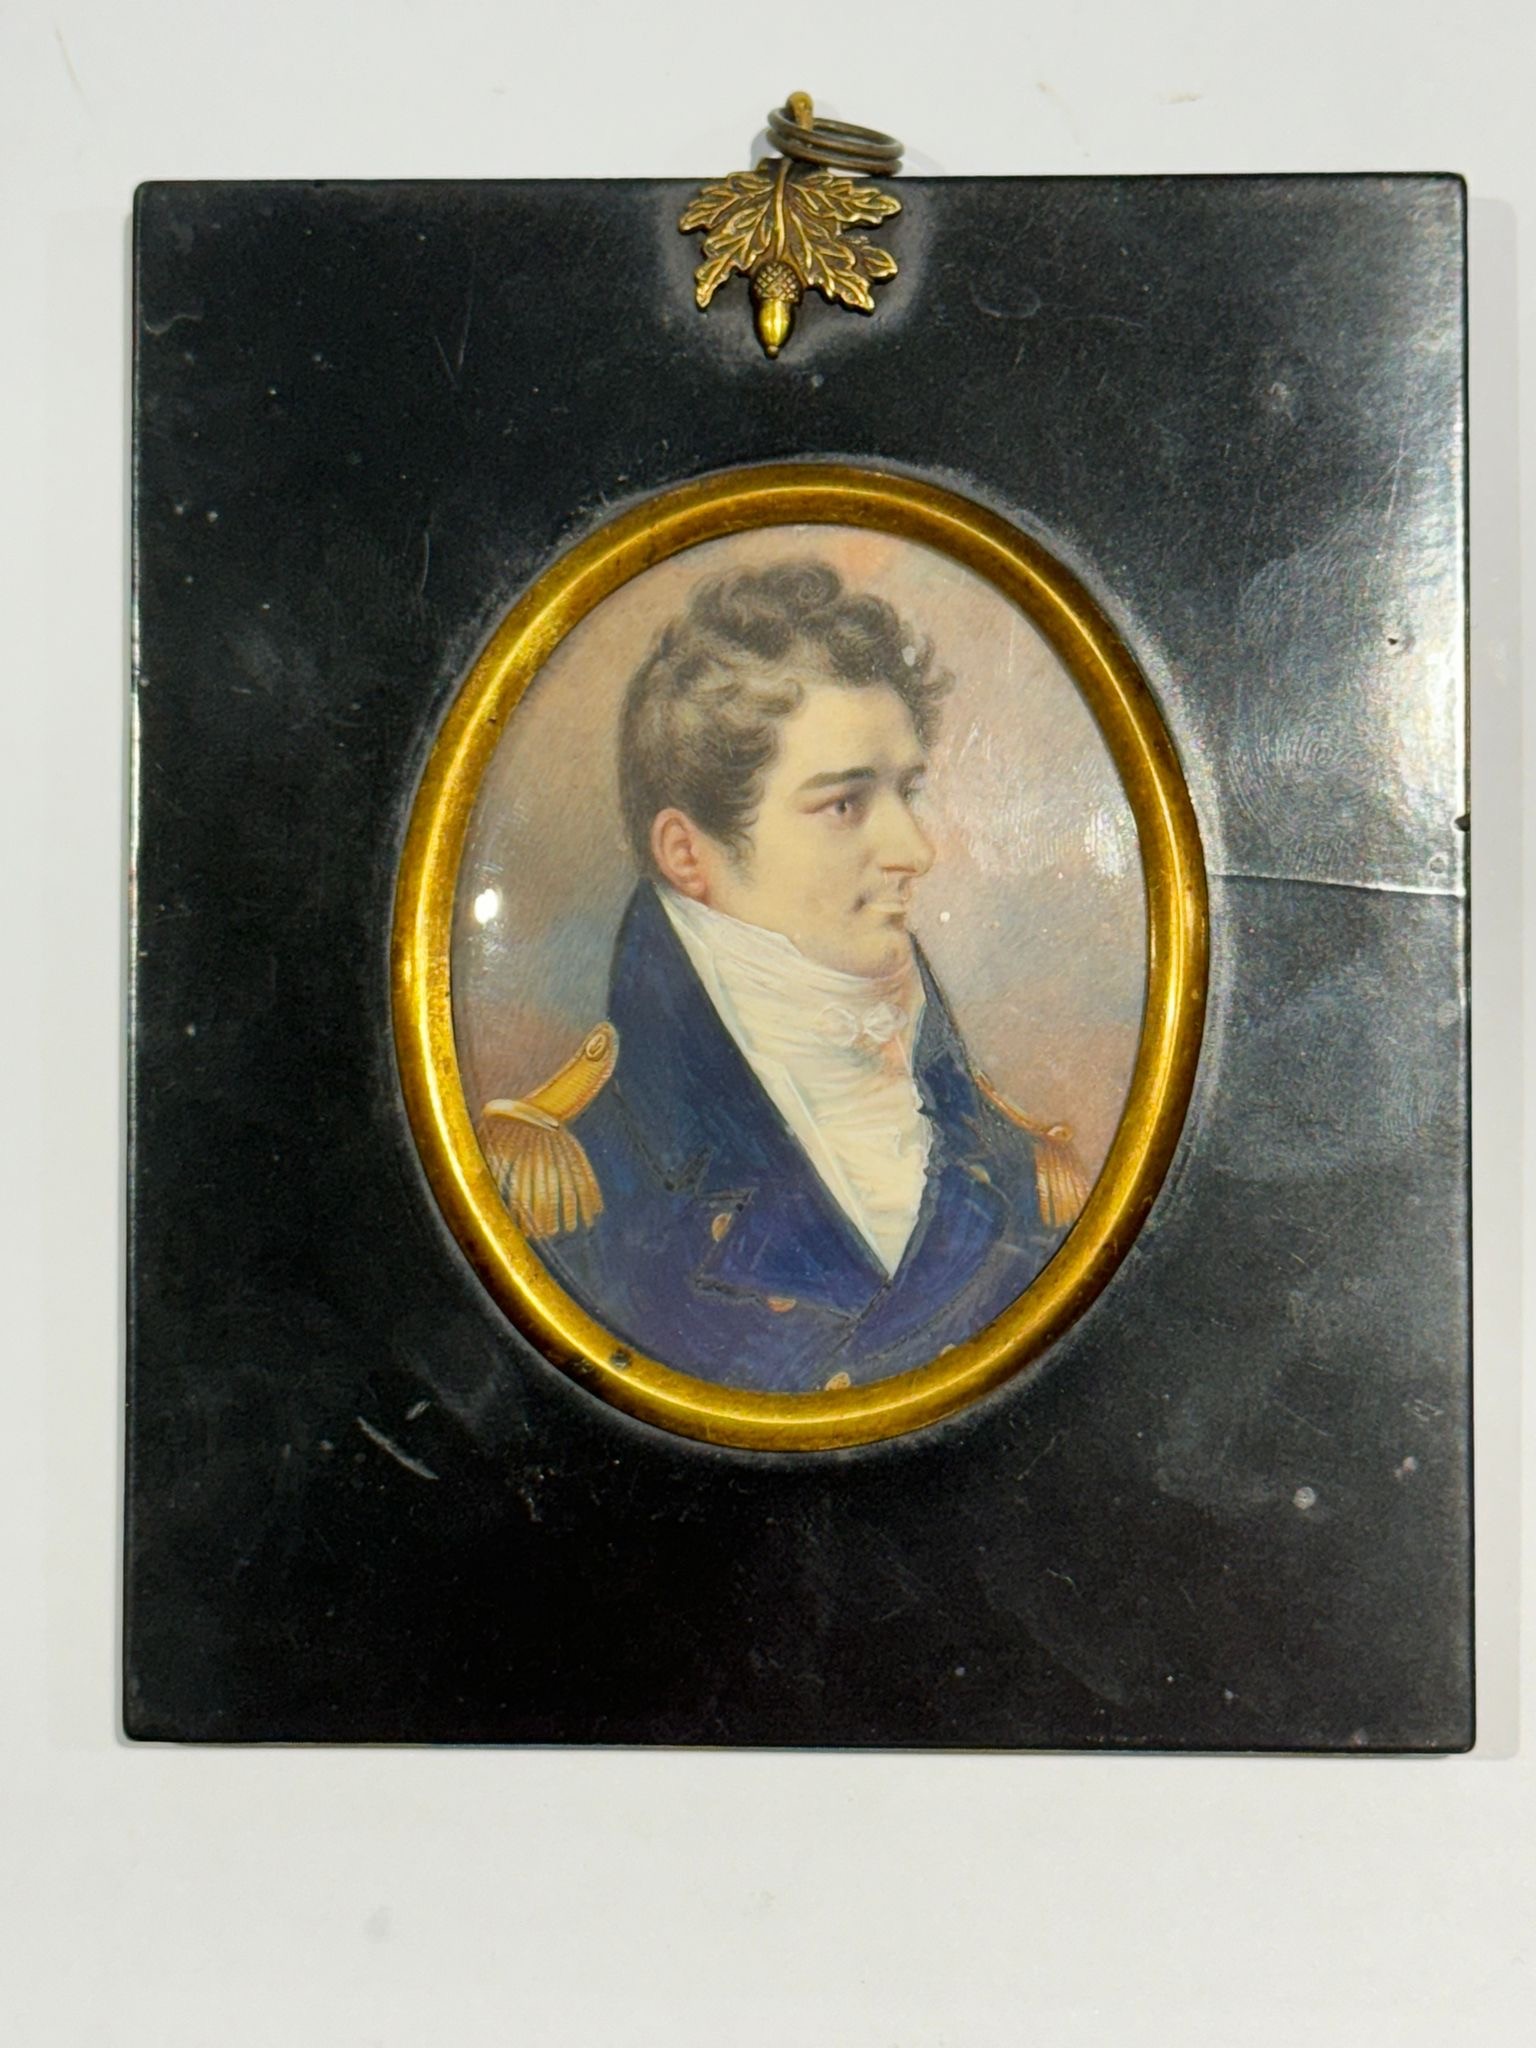 A Mid-19th century oval portrait miniature of a Naval Commander, with brown wavy hair with side